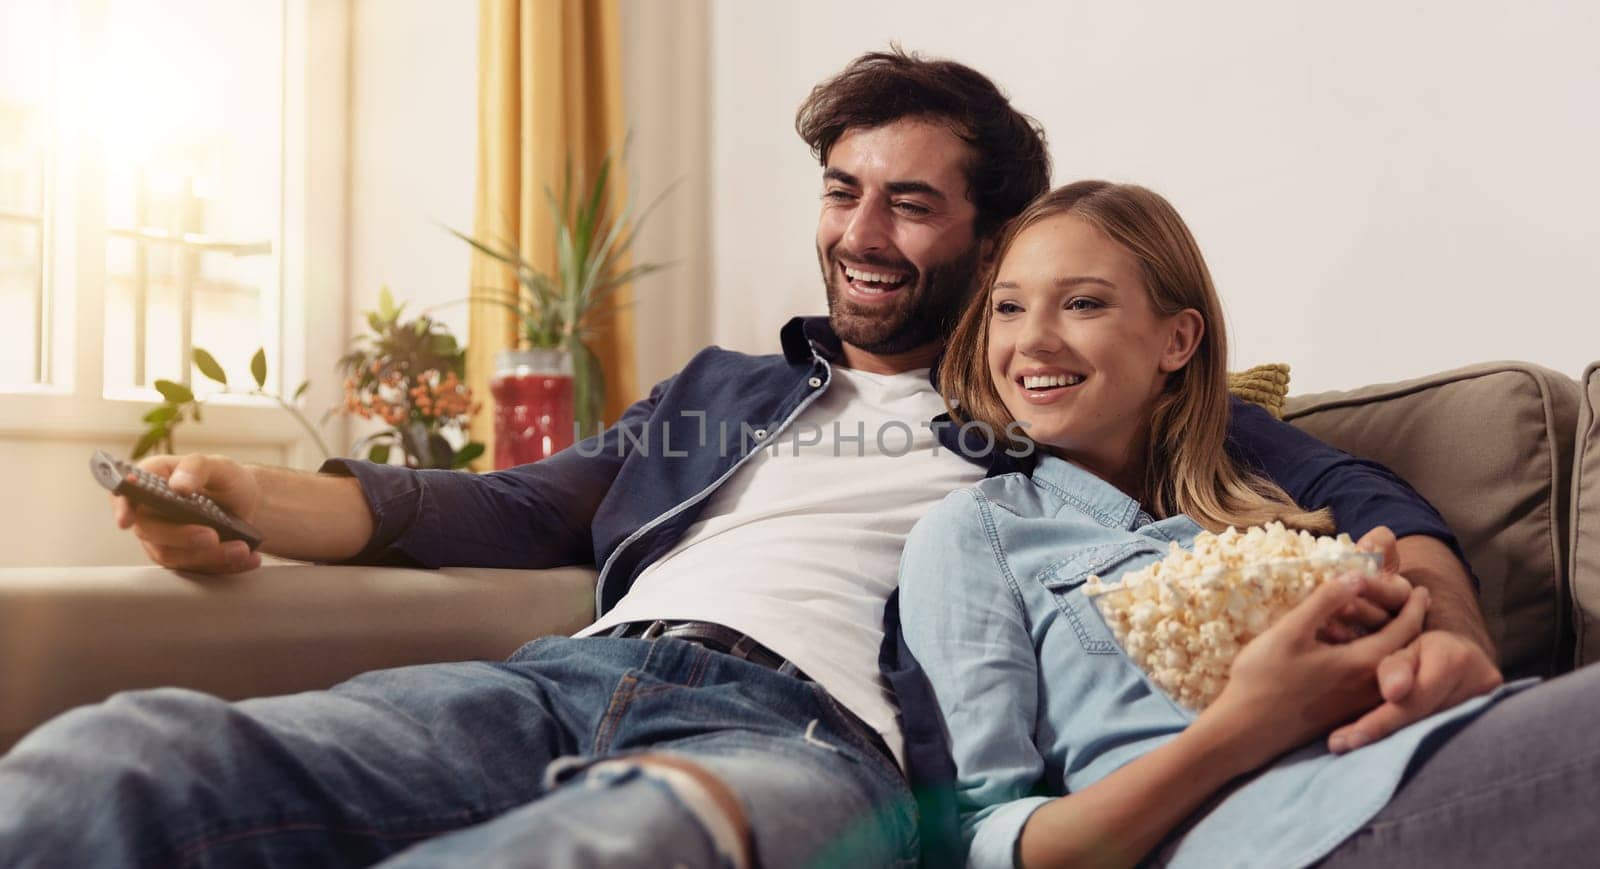 Couple watching TV, eating popcorn on a sofa at home